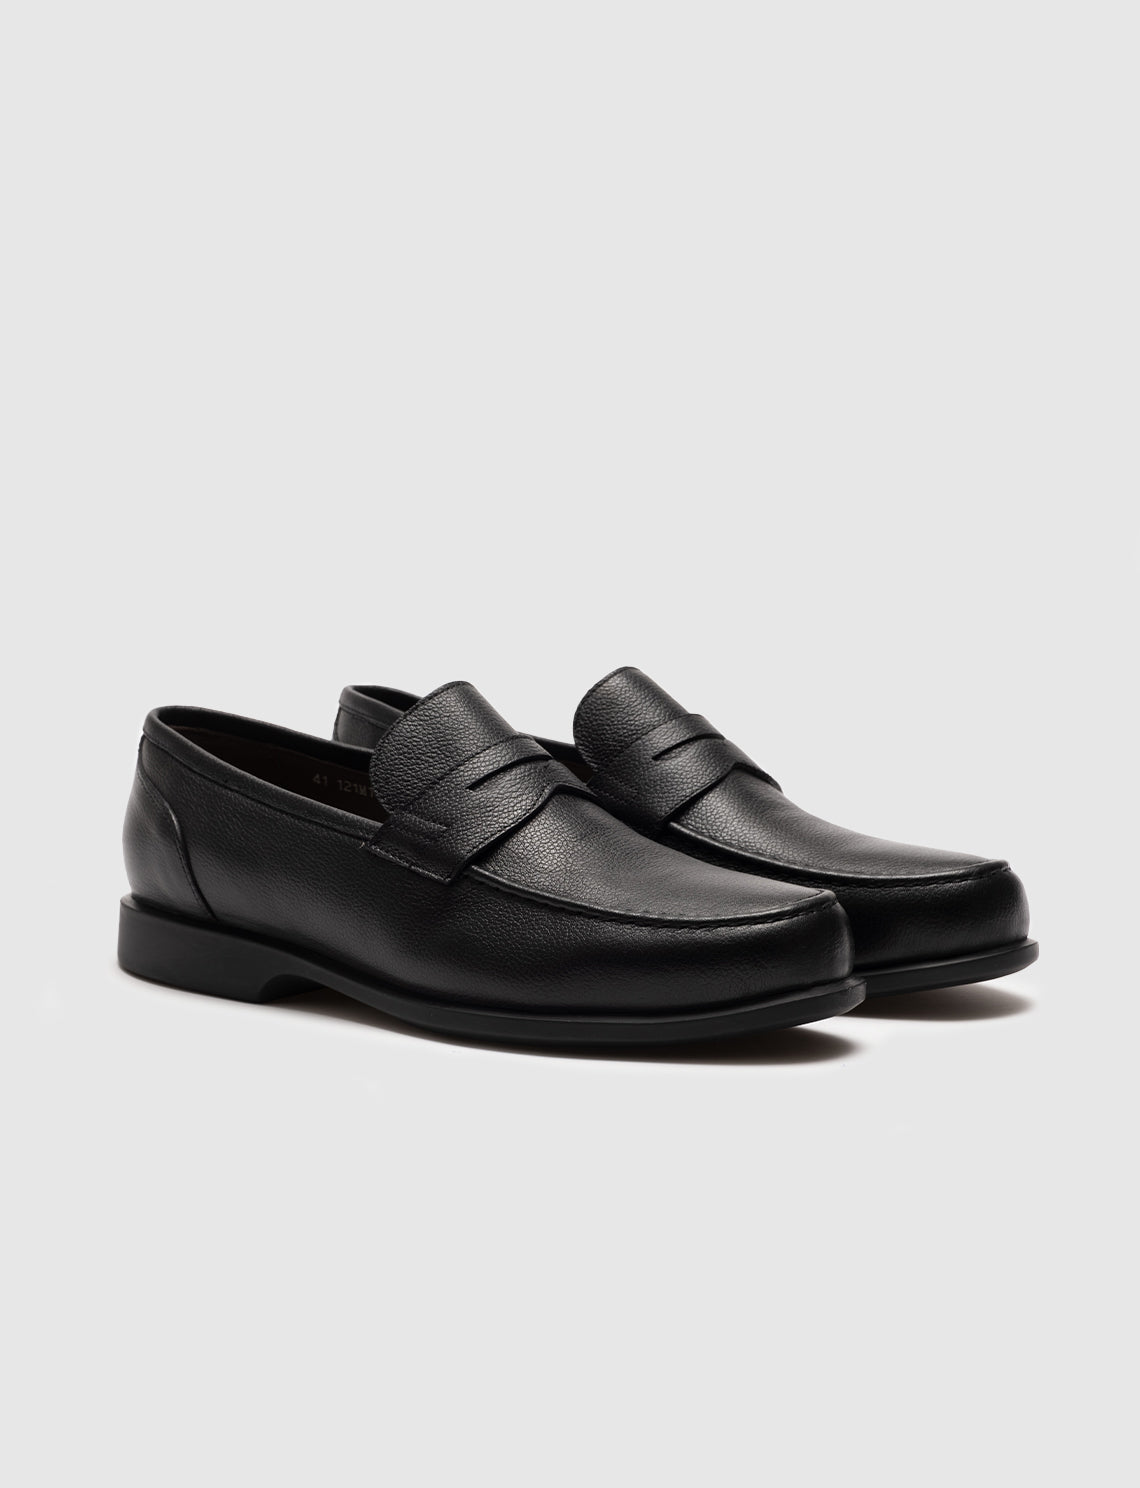 Men Black Genuine Leather Round Toe Penny Loafers